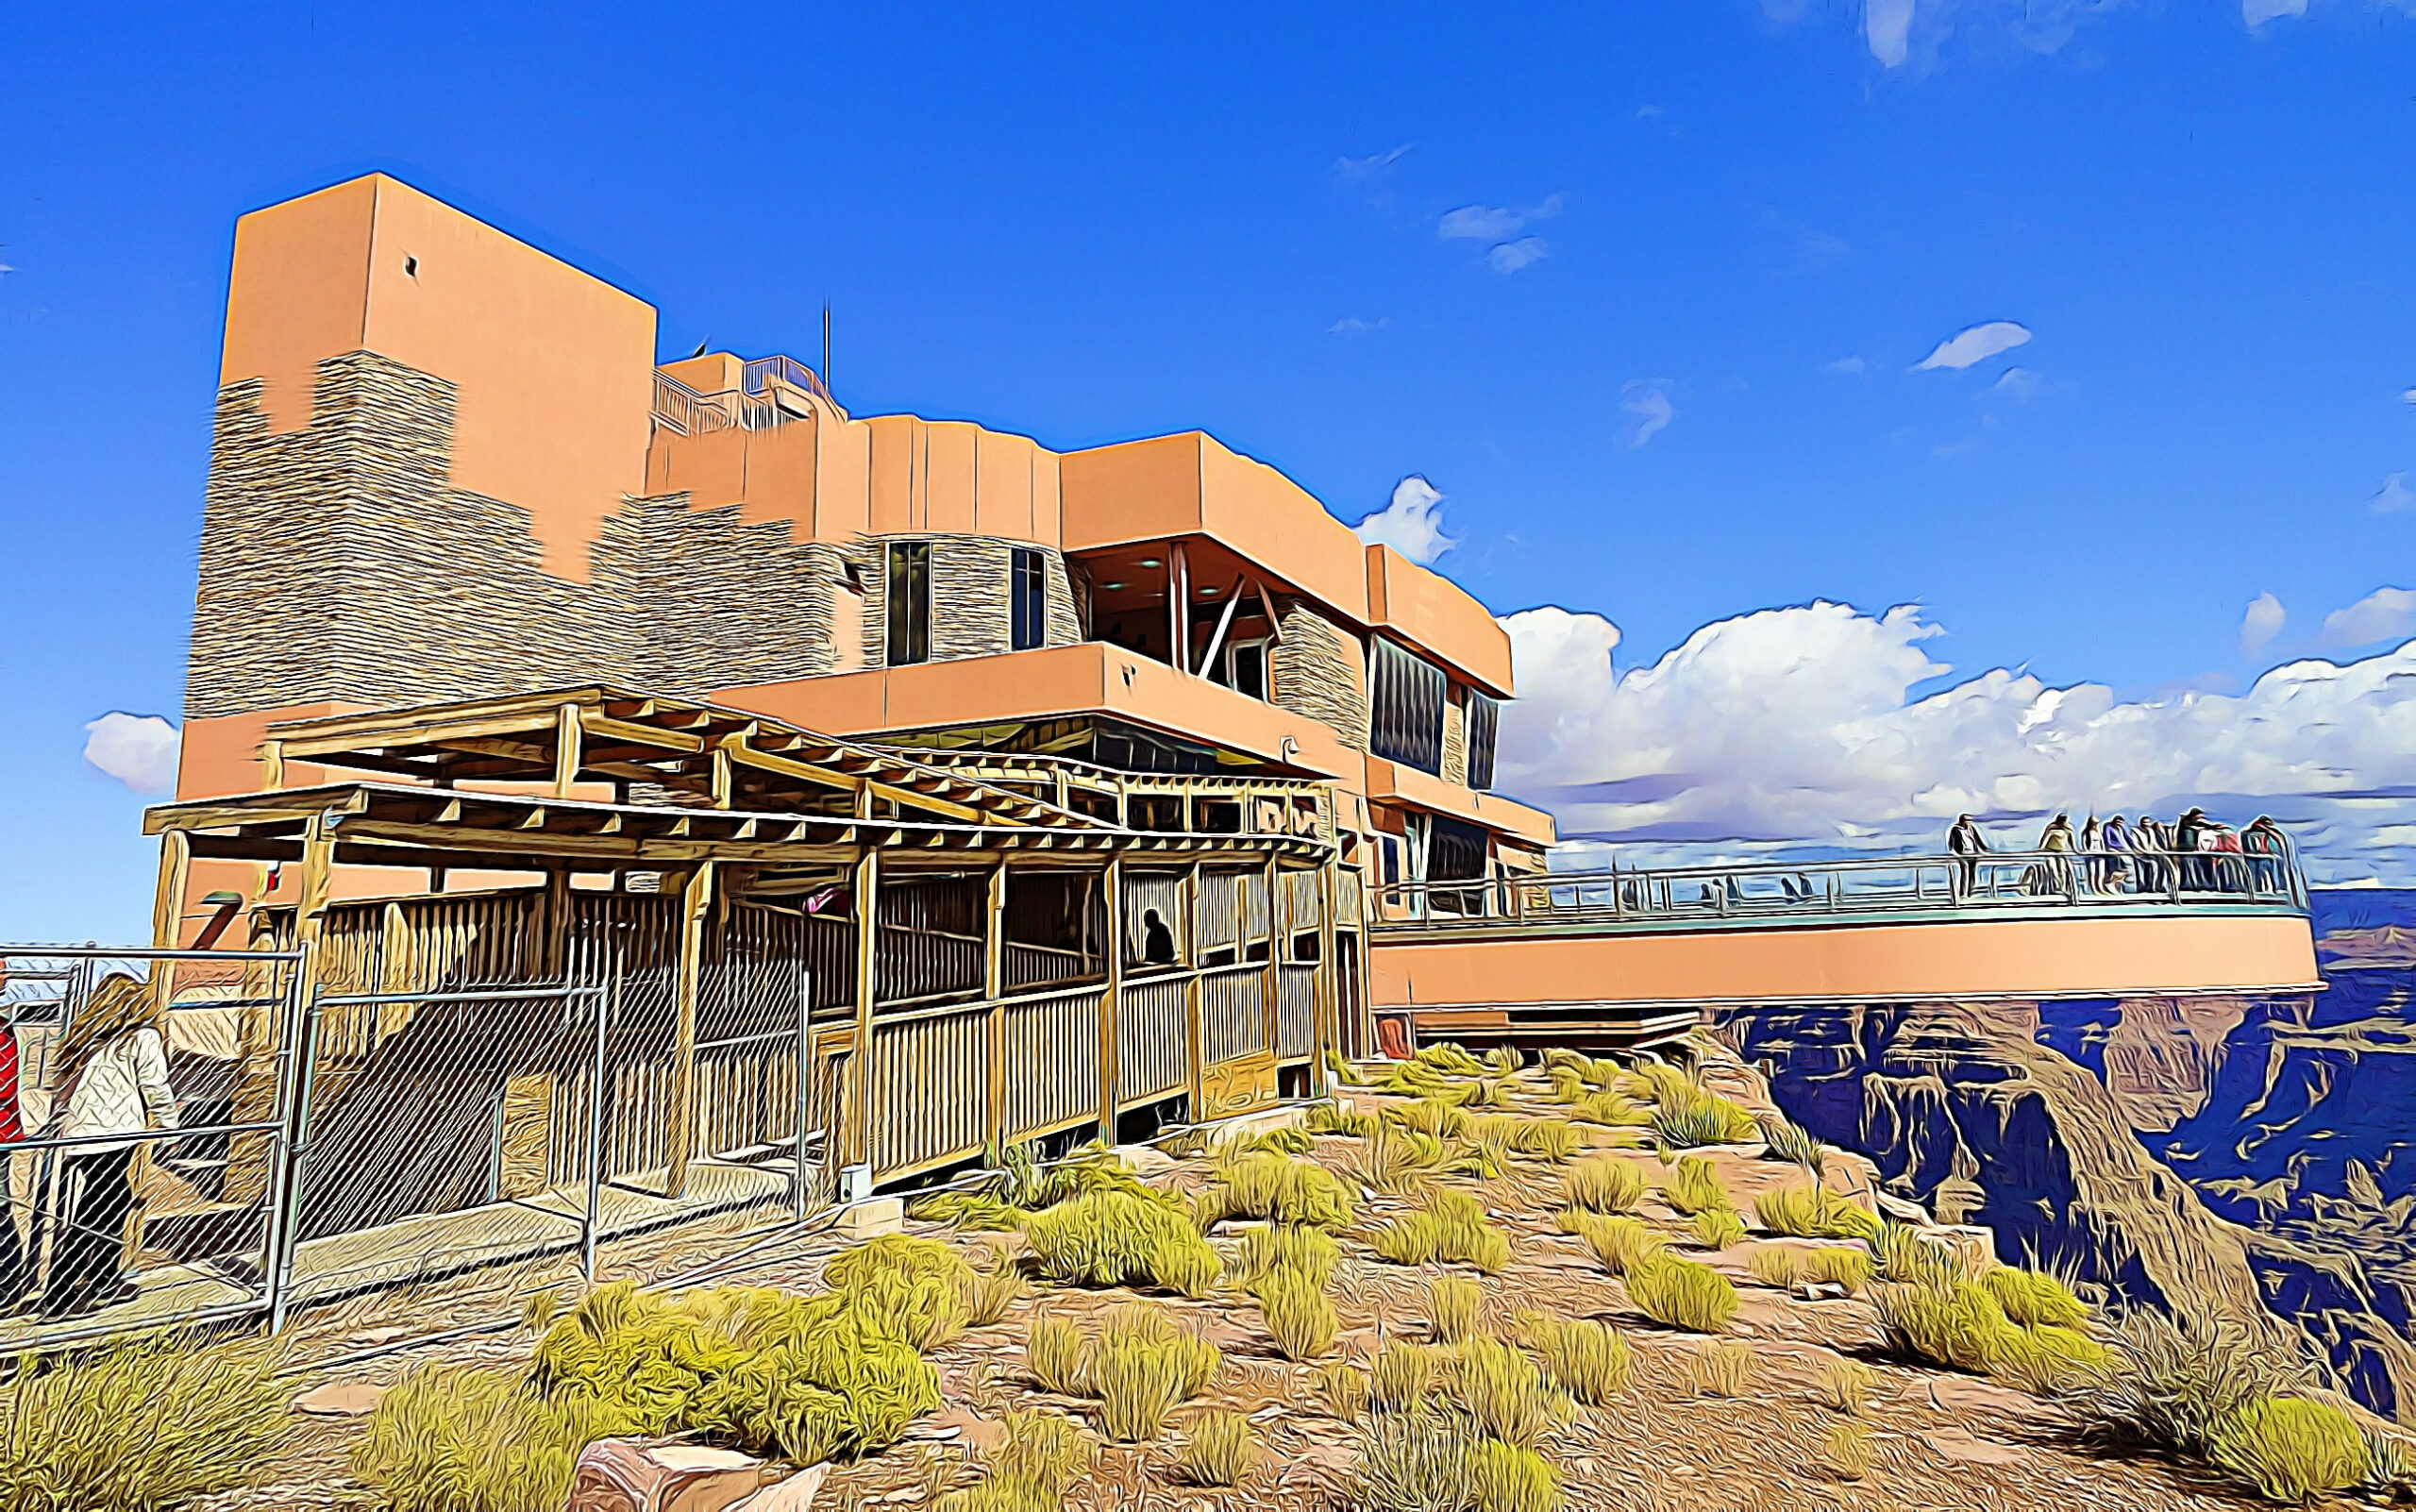 Image of the Grand Canyon Skywalk